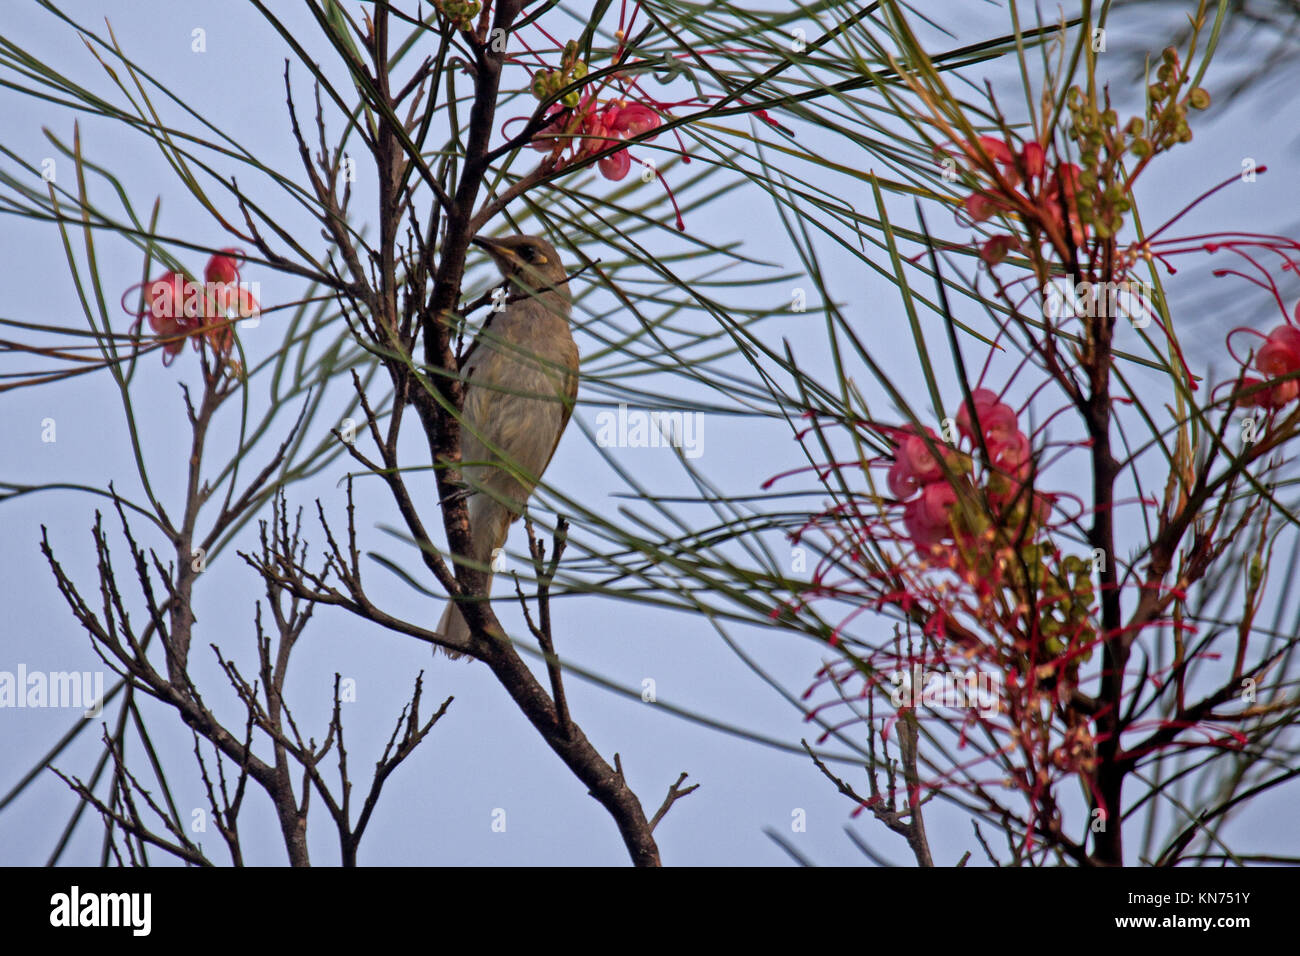 Brown honeyeater visiting flowering shrub in search of nectar in Queensland Australia Stock Photo